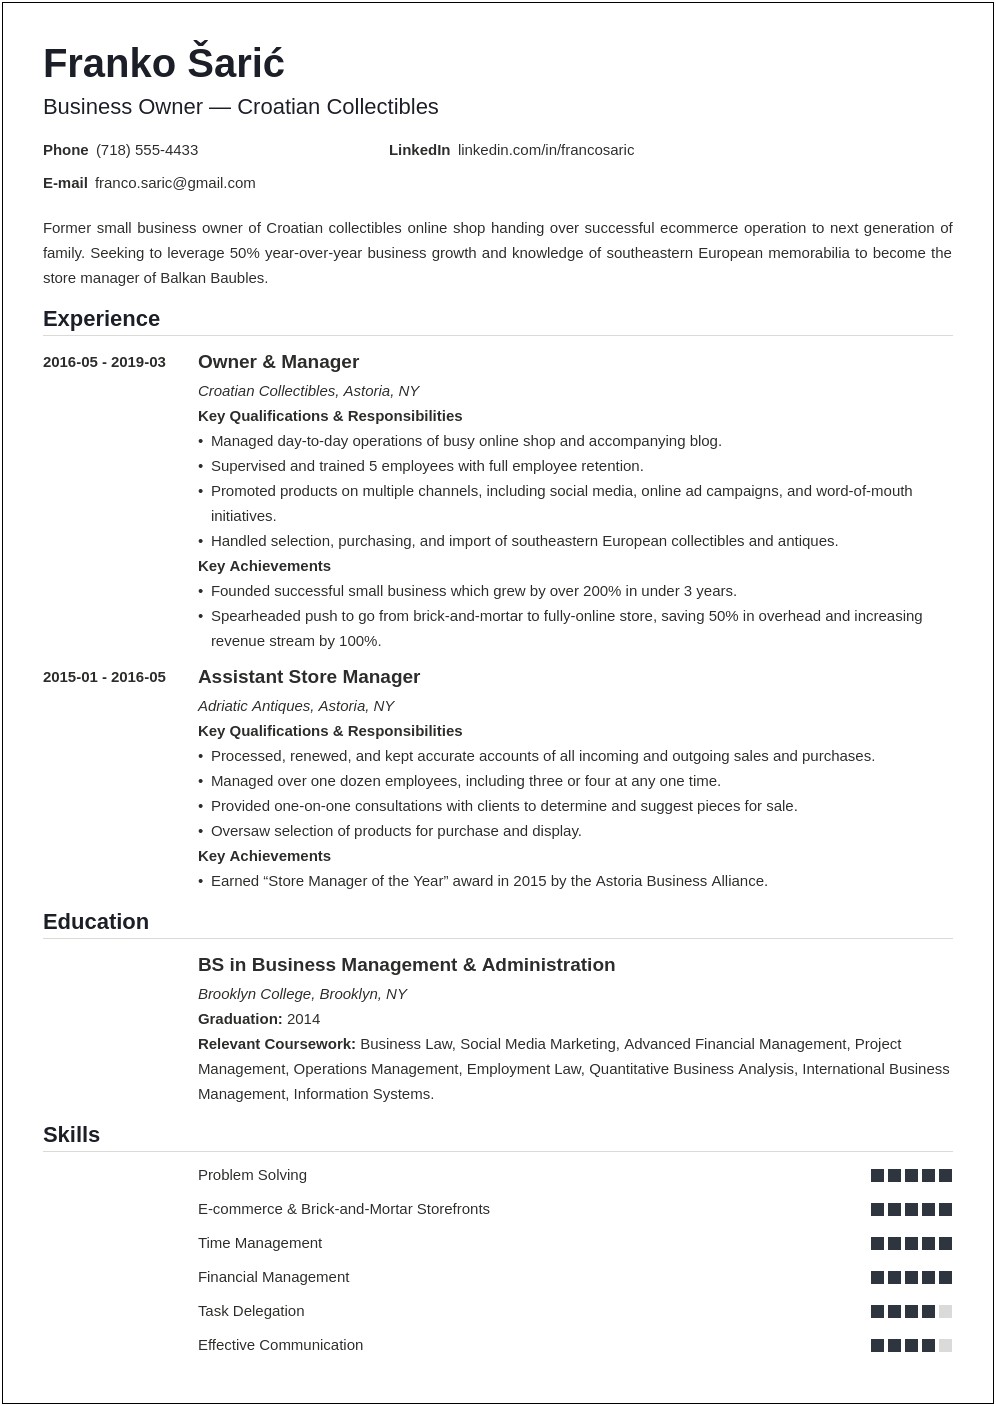 Example Resume Of Business Owner